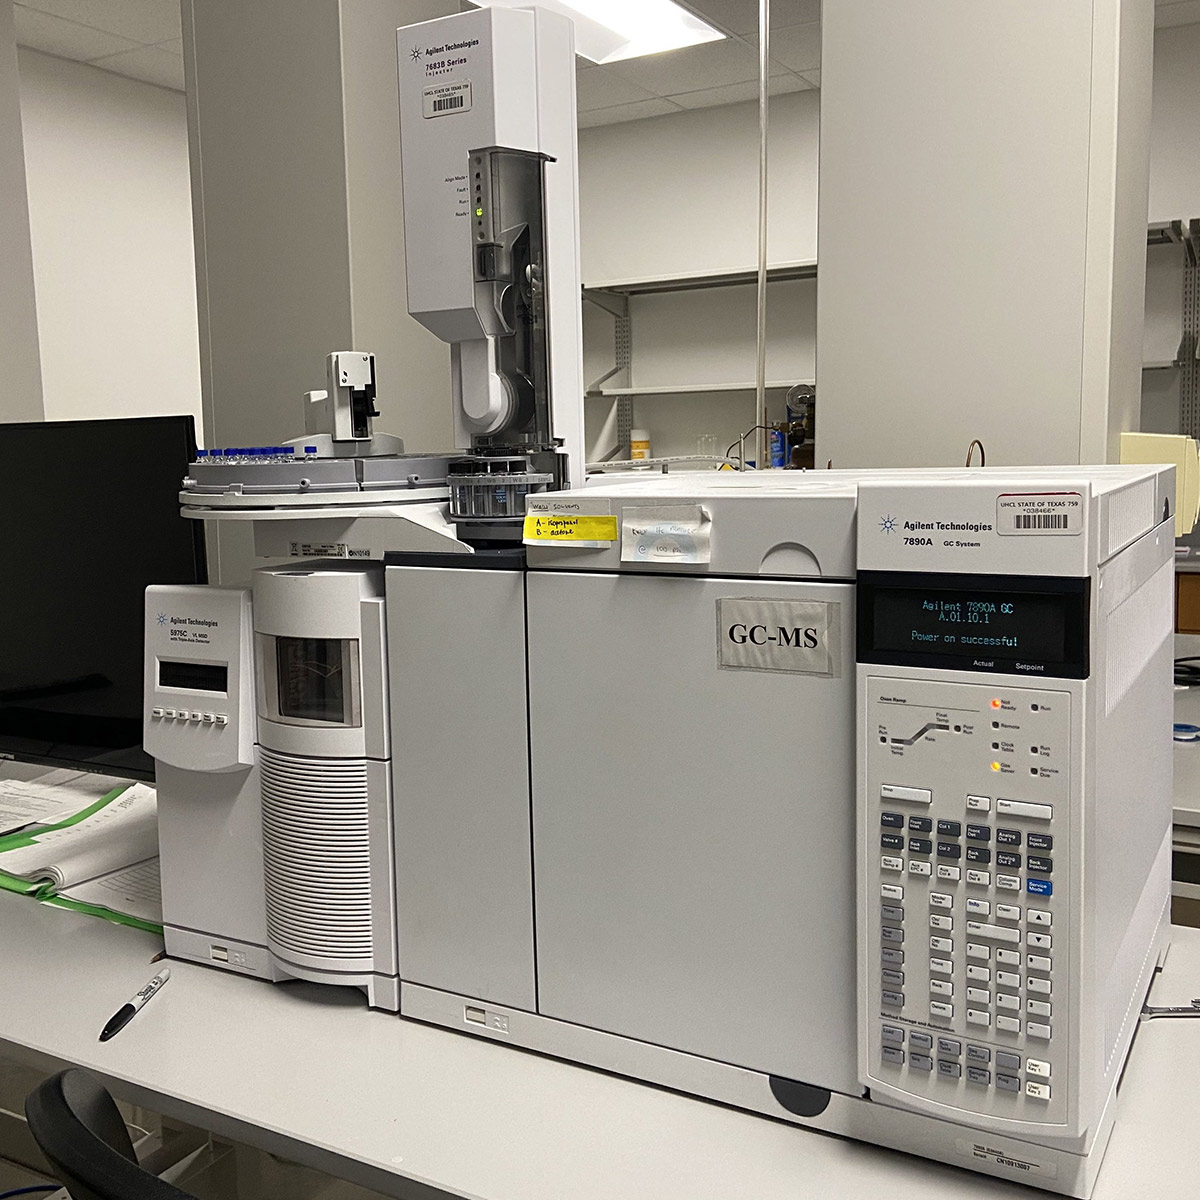 Agilent GC-MS System consisting of 7890A GC and 5975C Mass-Selective detector (also equipped with µECD detector)